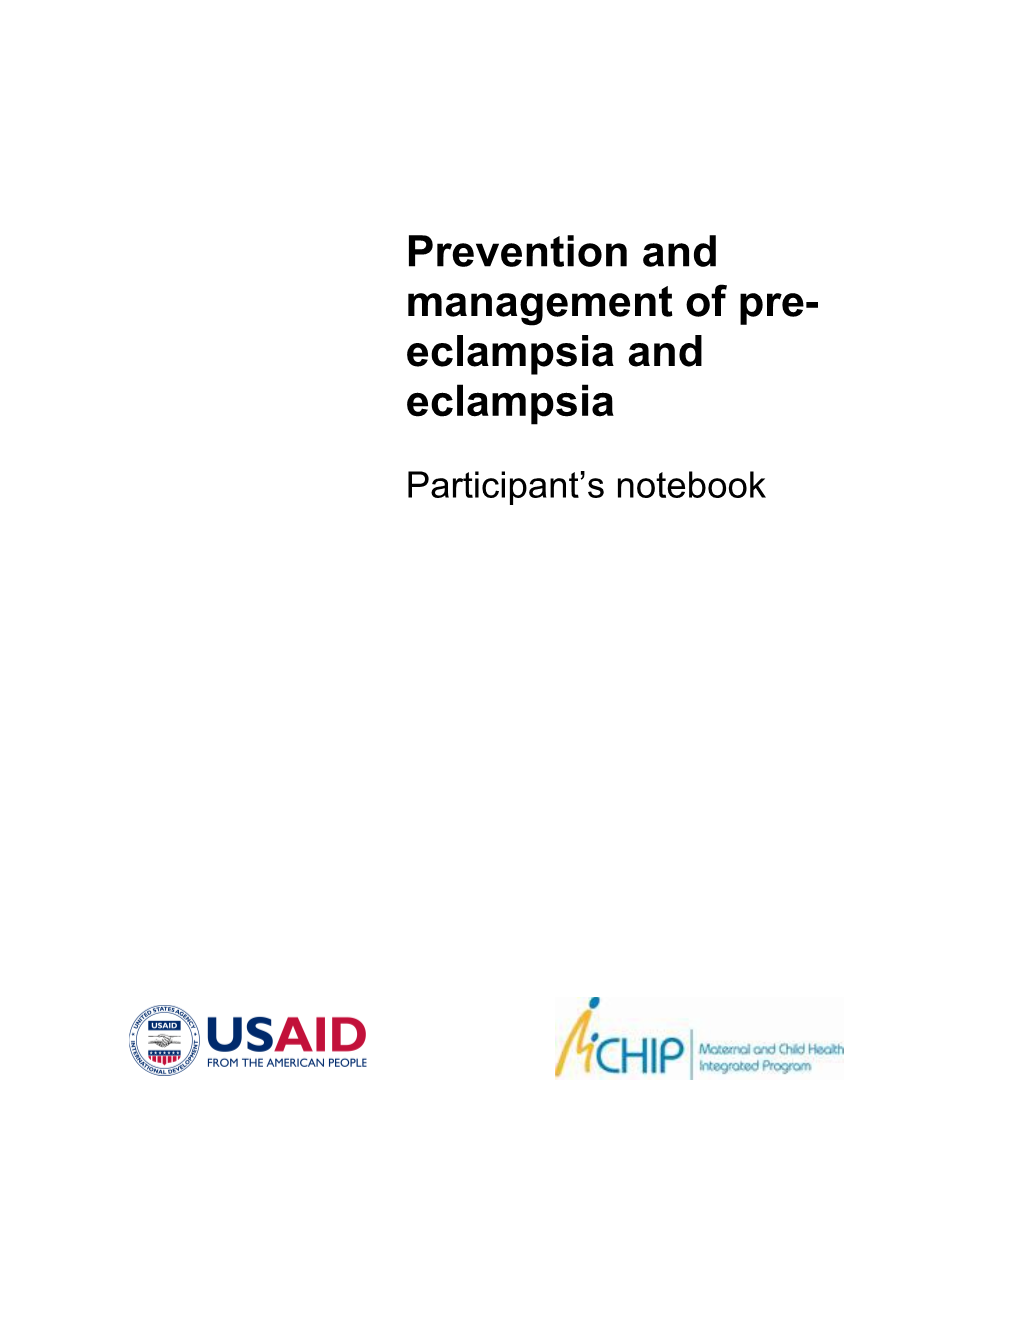 Prevention and Management of Pre-Eclampsia and Eclampsia